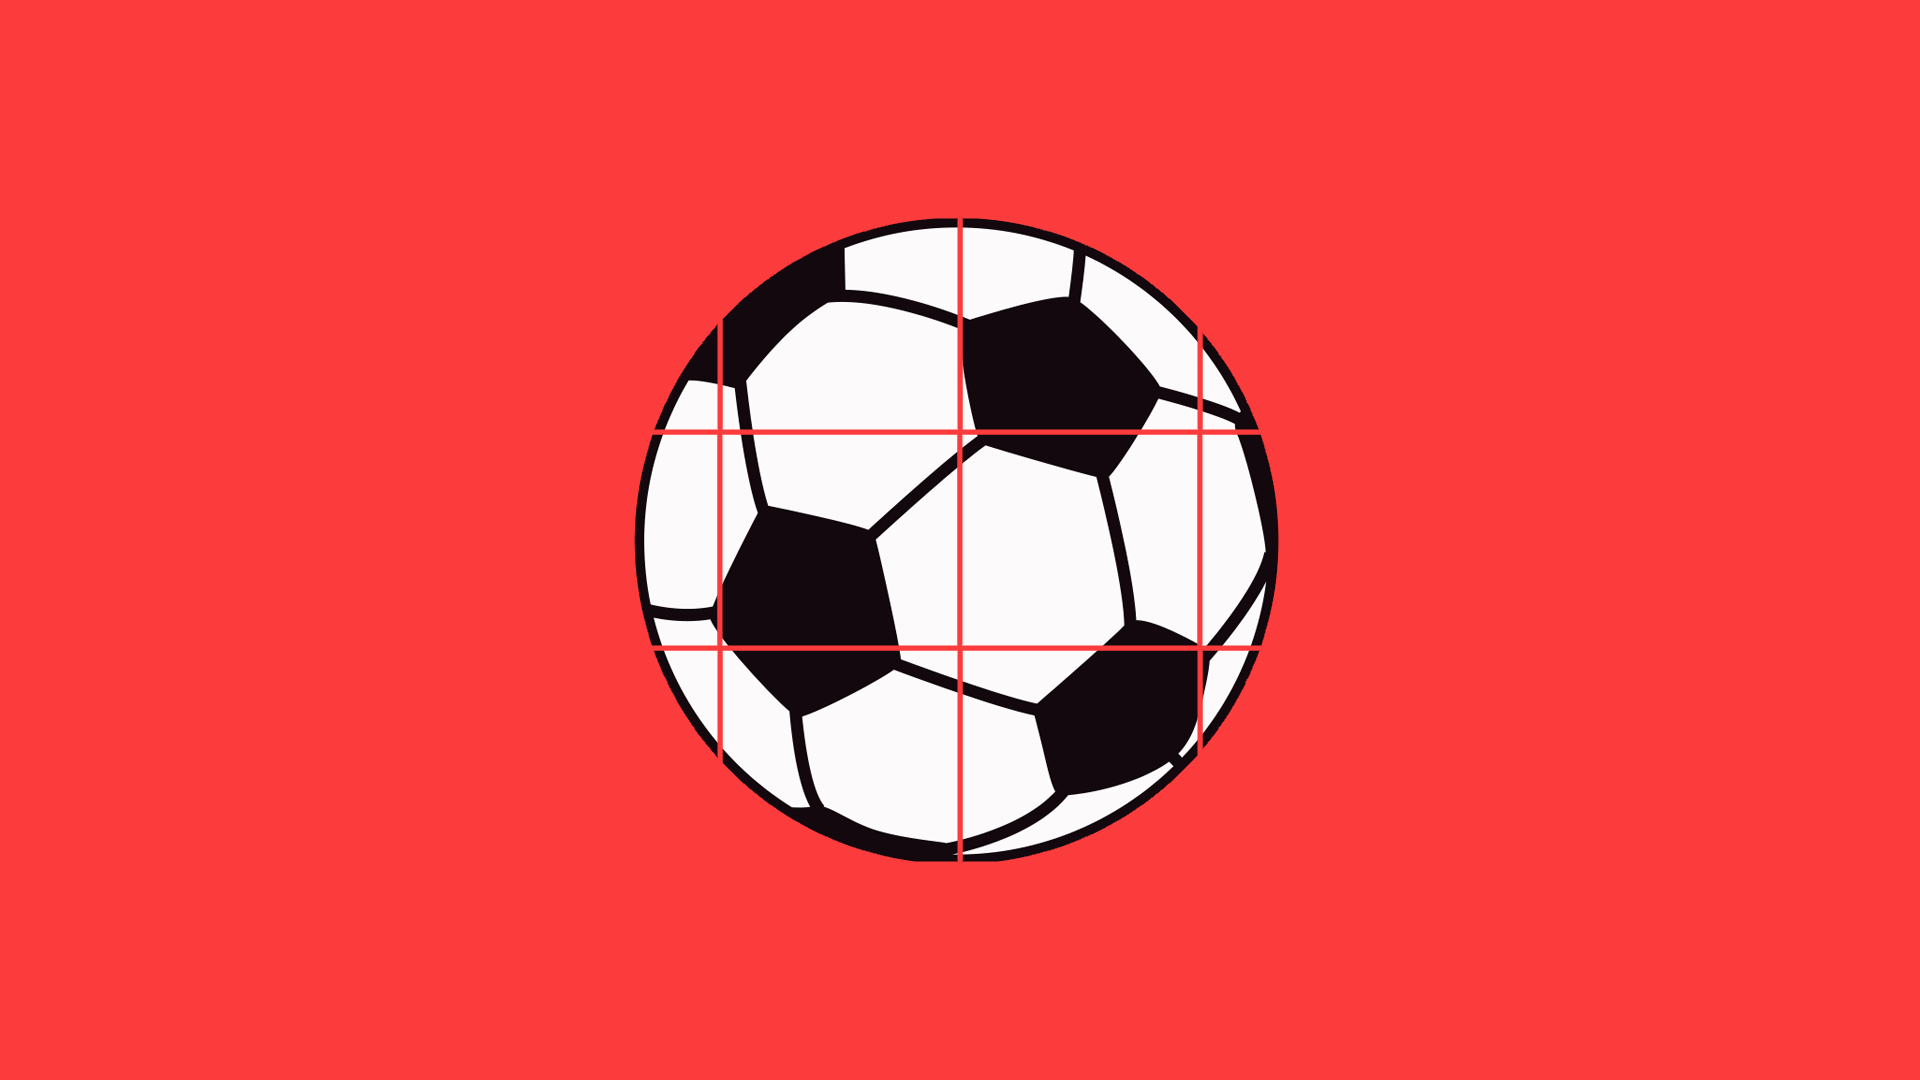 Illustration of a soccer ball broken up into small pieces and rearranged.